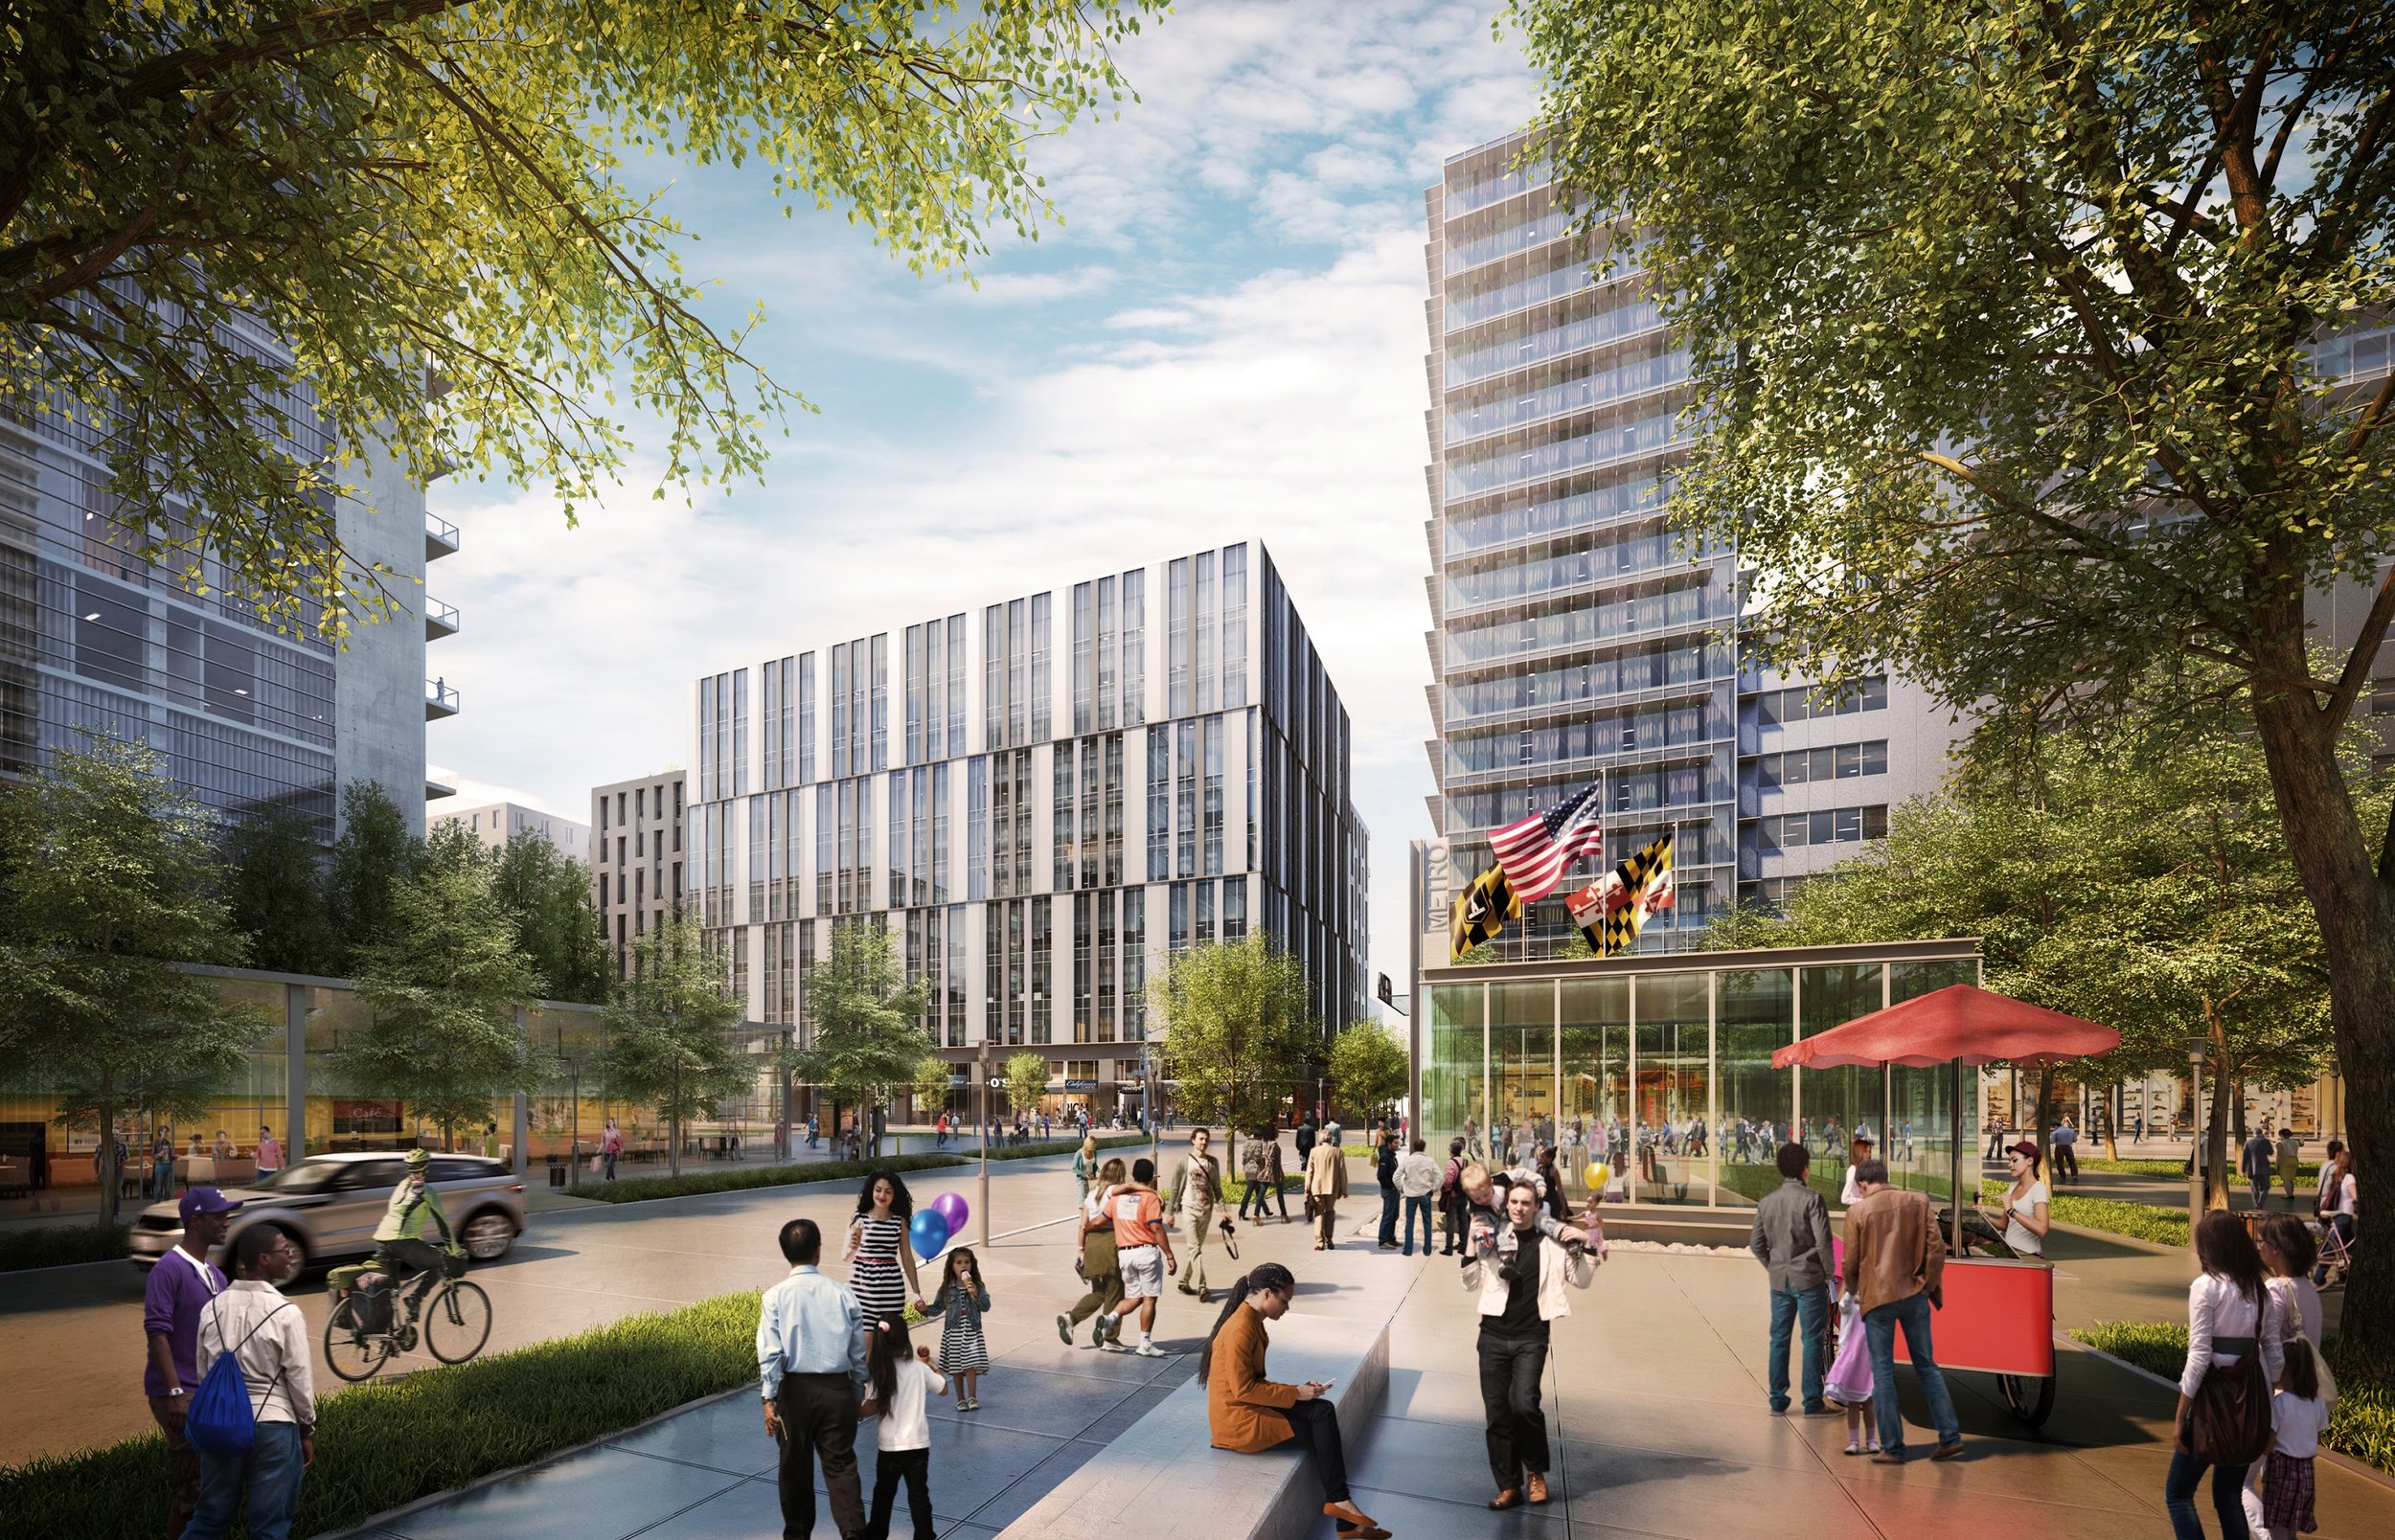   The State Center redevelopment plan would turn a concrete wasteland with the largest concentration of State agencies in Maryland into a thriving, vibrant, 24/7 neighborhood that features efficient state and private offices, residential condominiums